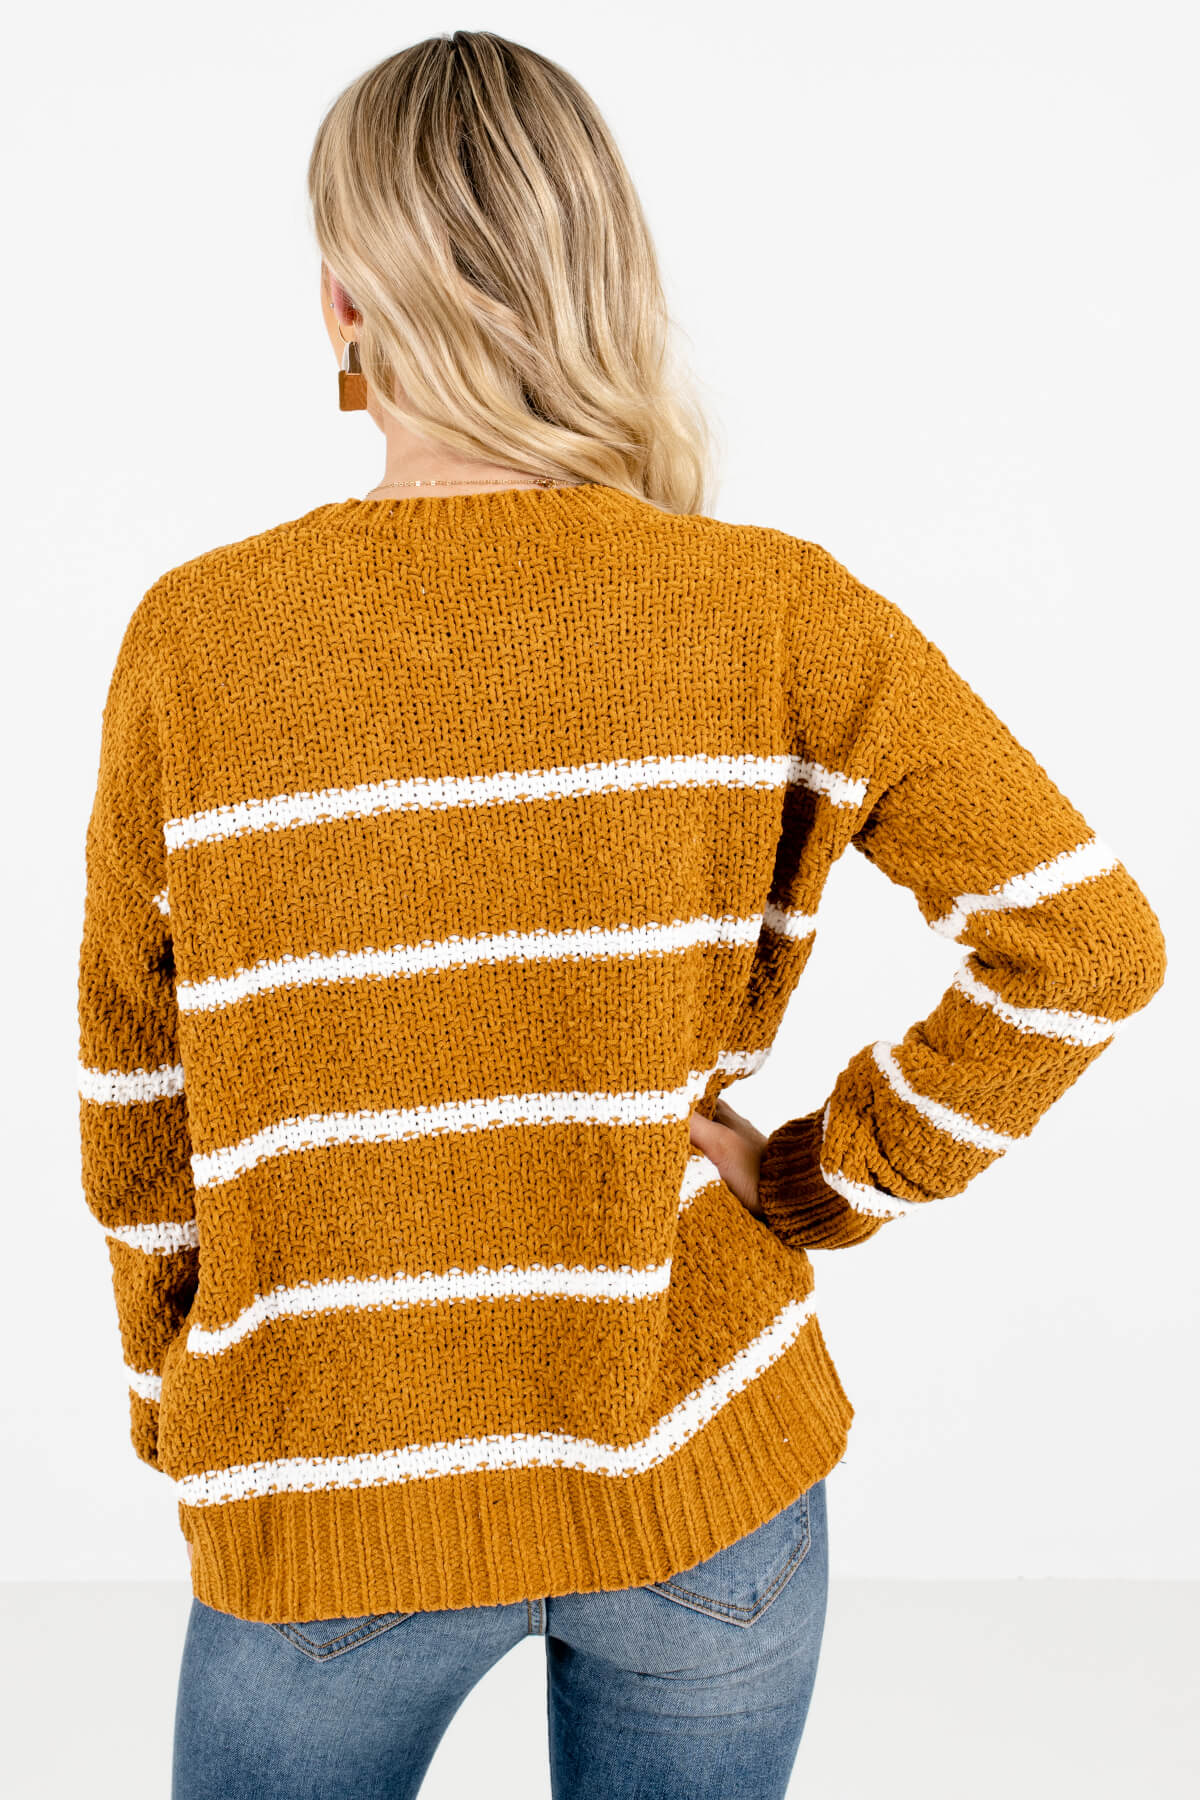 Women's Mustard Yellow Soft Knit Material Boutique Sweater